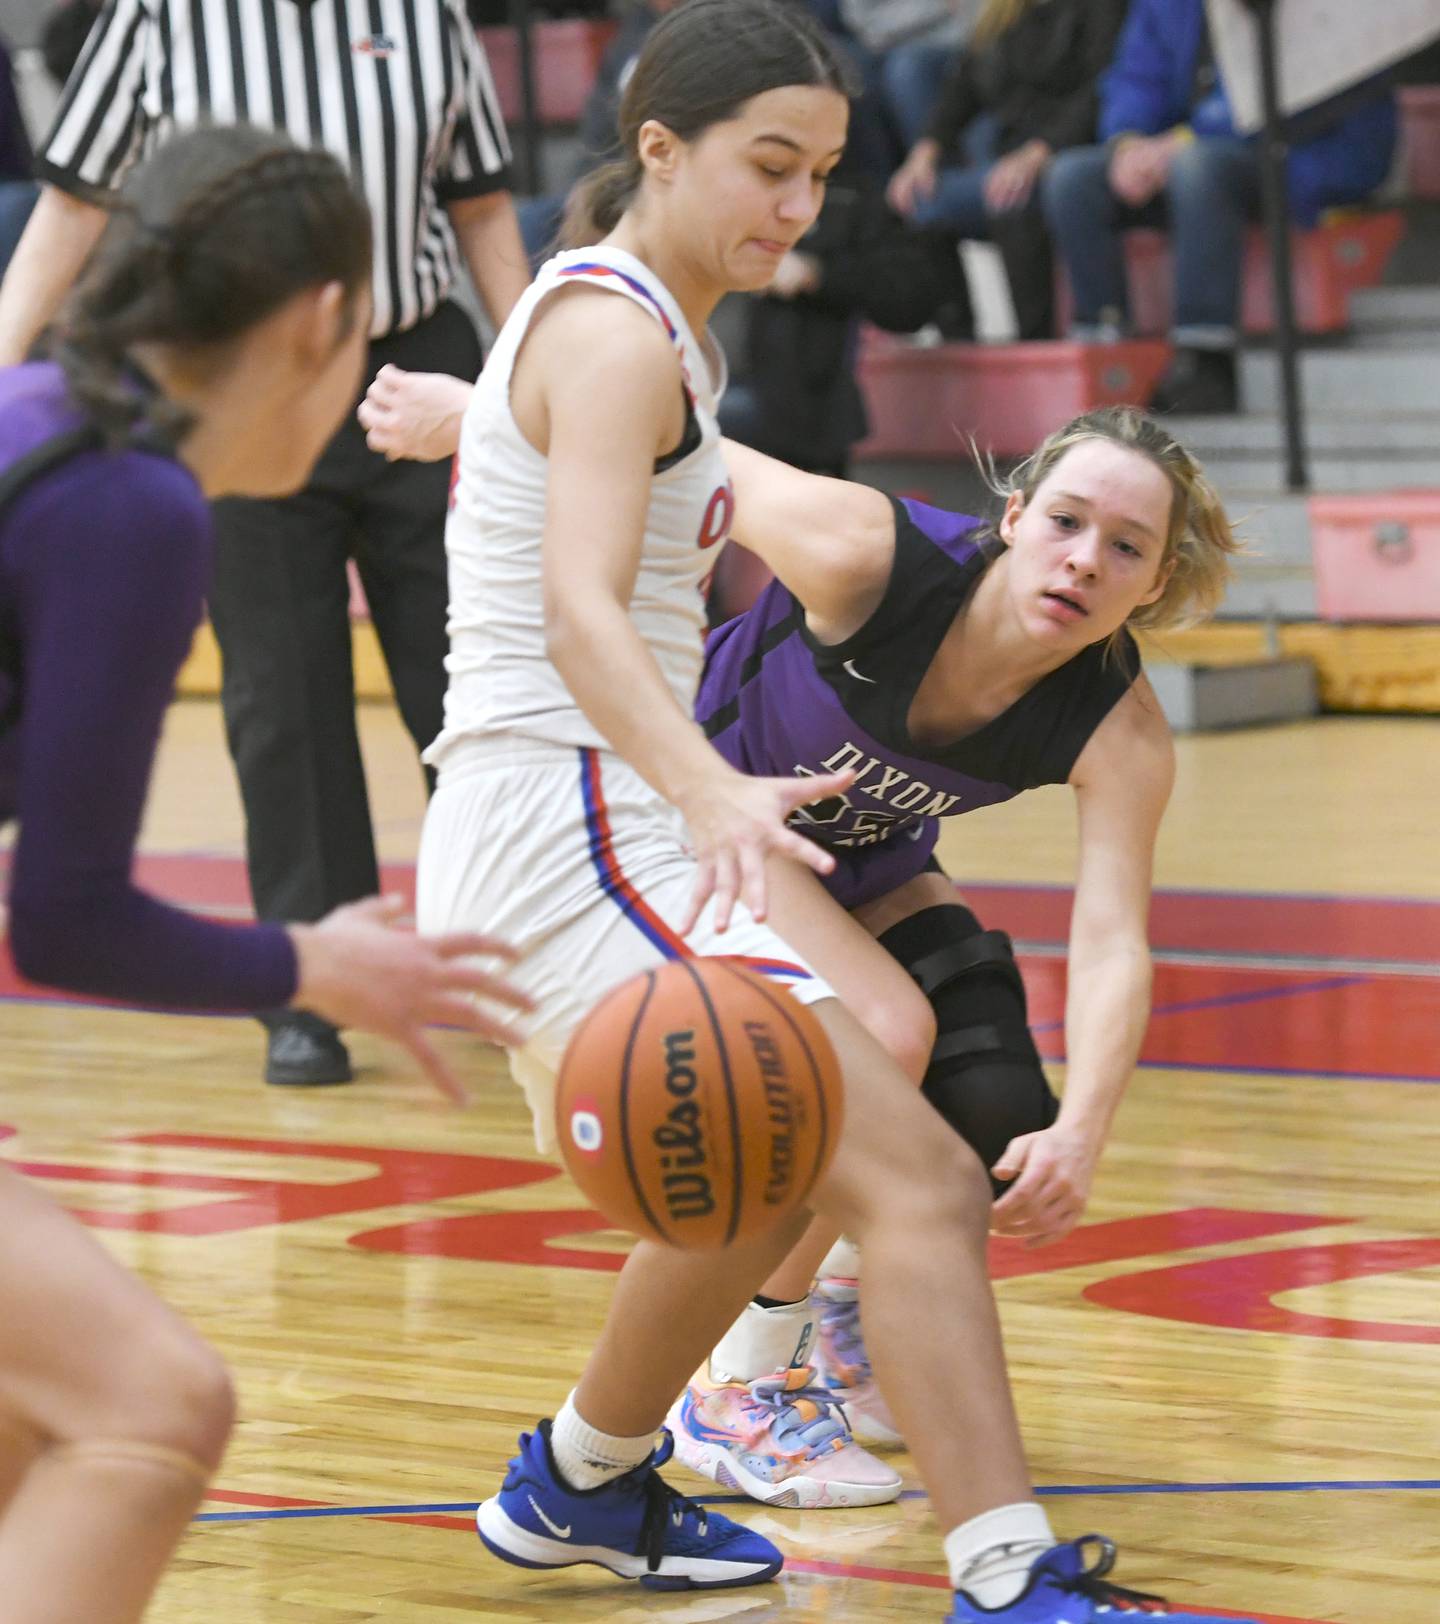 Dixon's Hannah Steinmeyer (23) makes a pass to teammate Harvest Day as Oregon's Sarah Eckhardt defends during Big Northern Conference action at the Blackhawk Center in Oregon on Saturday, Jan, 21.